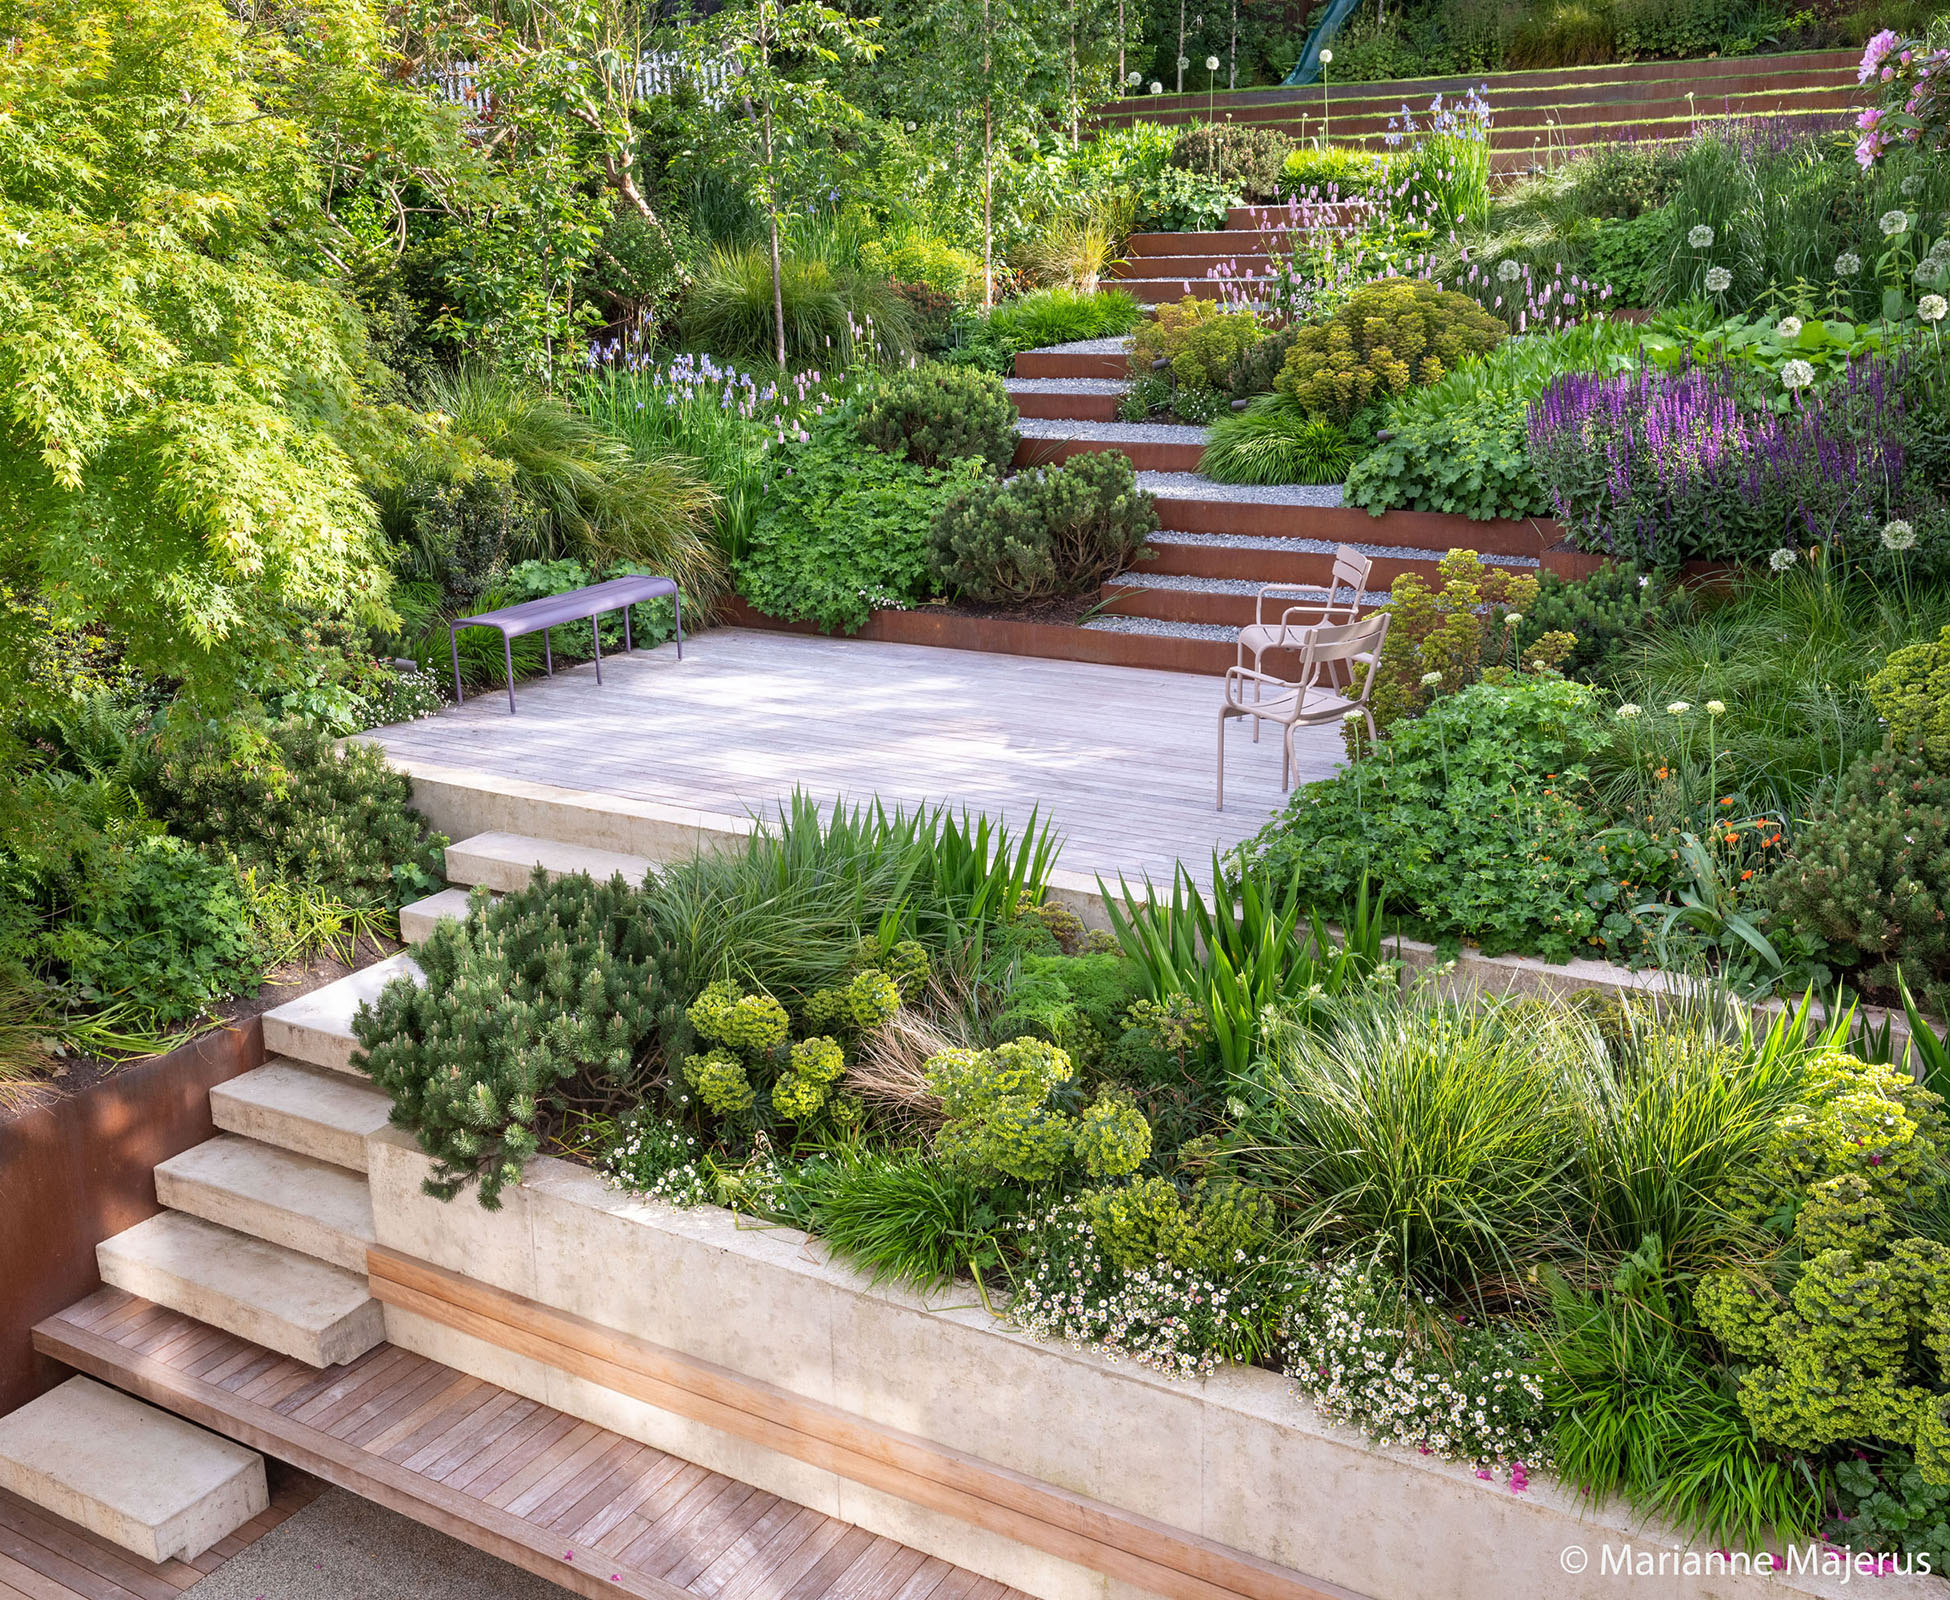 Overview of the garden that reveals how the design layout represents an elegant but also functional solution to interconnect a garden set on a steep slope in Muswell Hill.